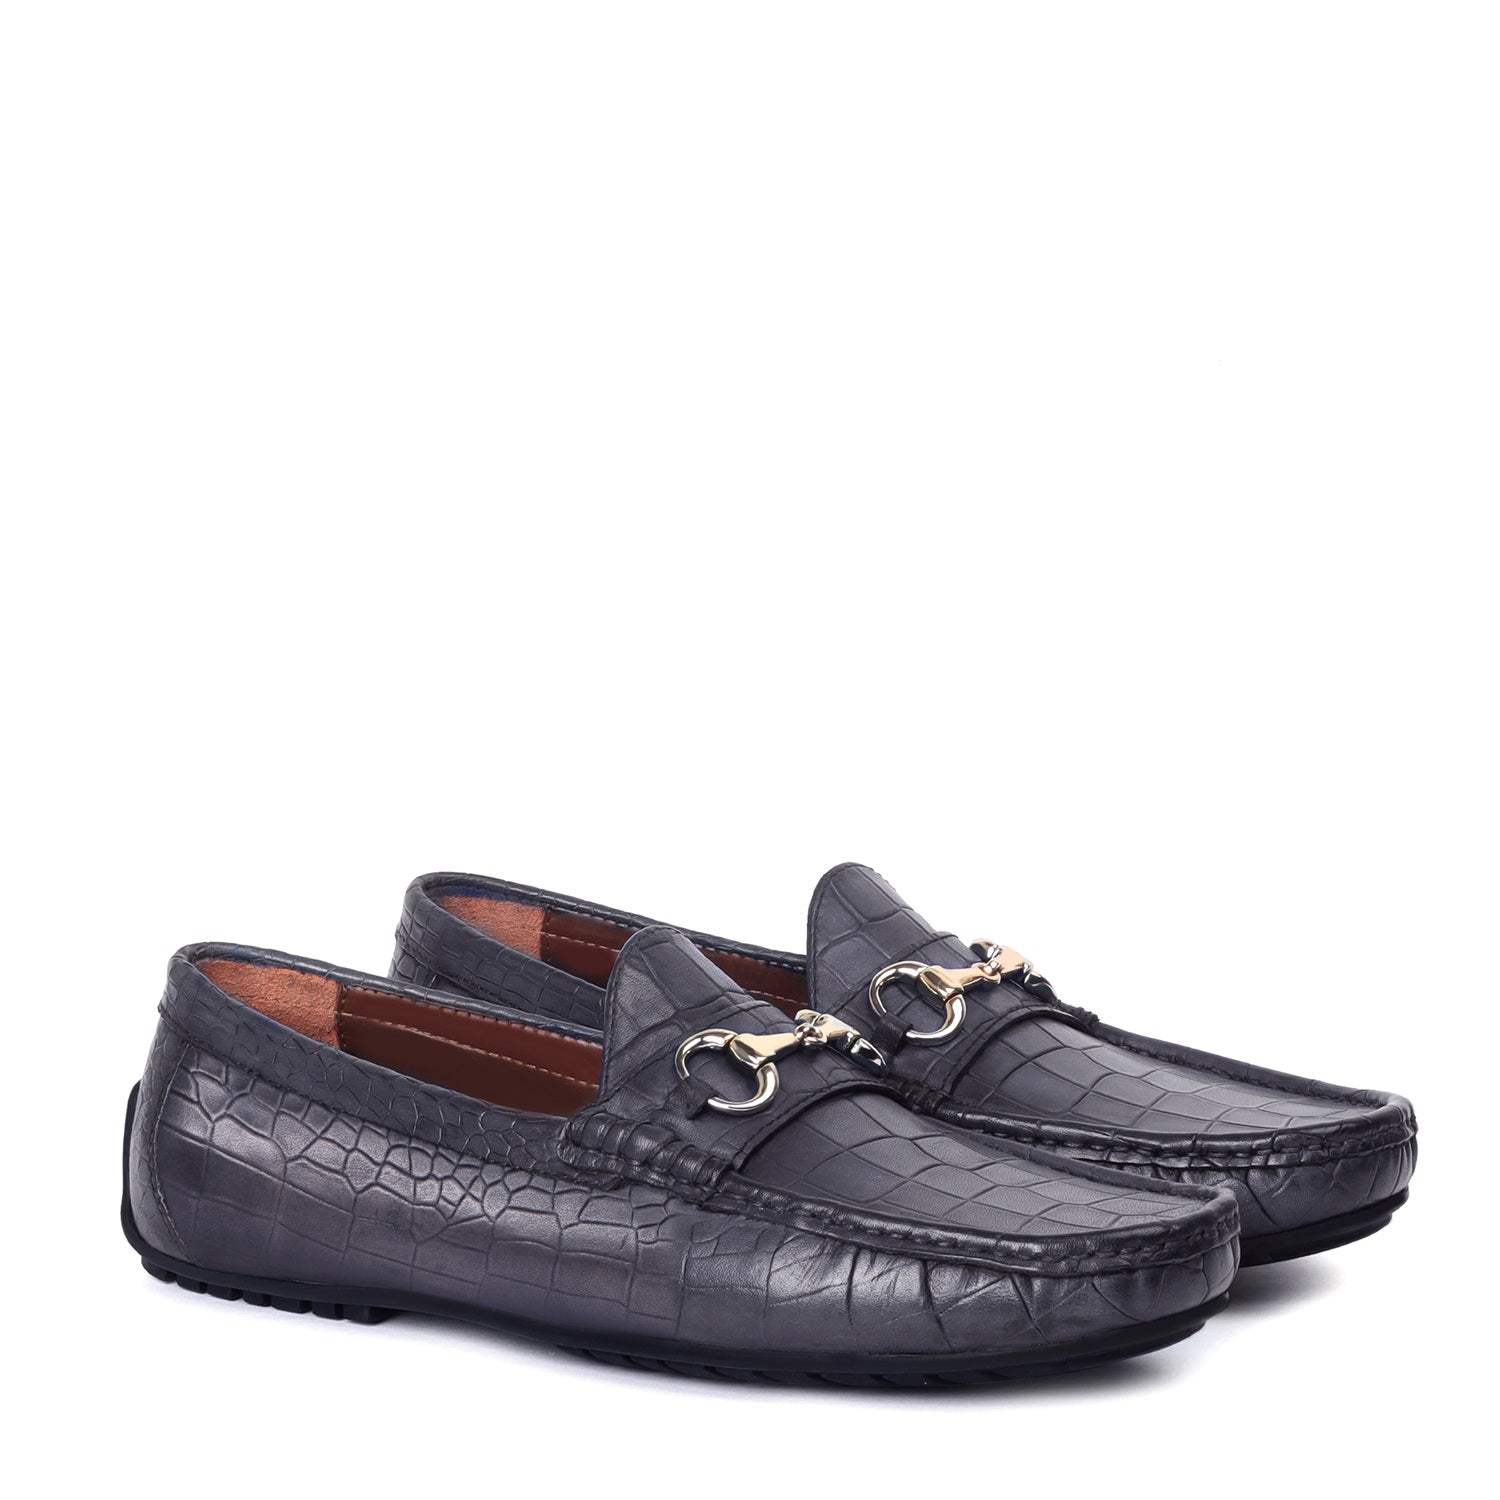 Croco Textured Grey Leather Loafer With Horse-bit Buckle